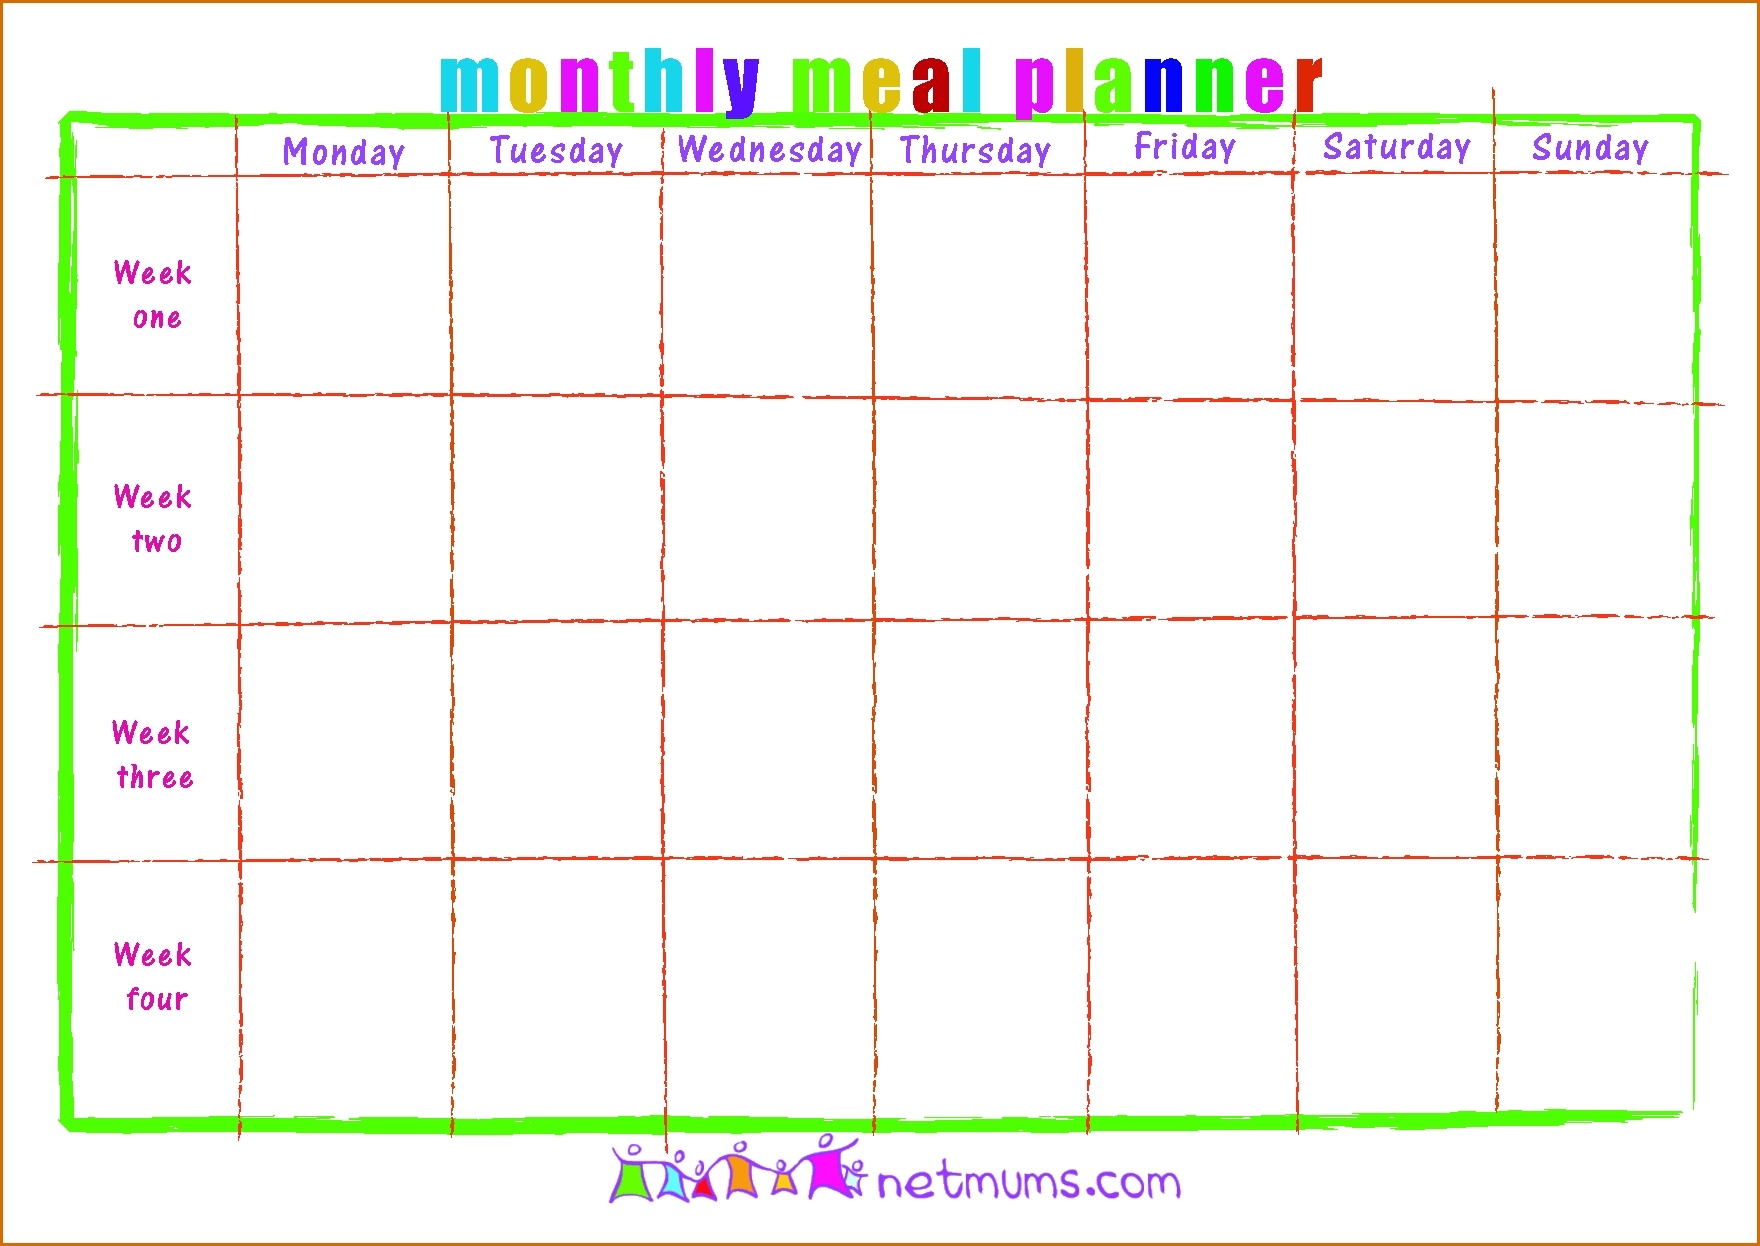 Impeccable Blank Weekly Meal Planner Template Weekly Meal Planner Monthly Calendar Meal Planning